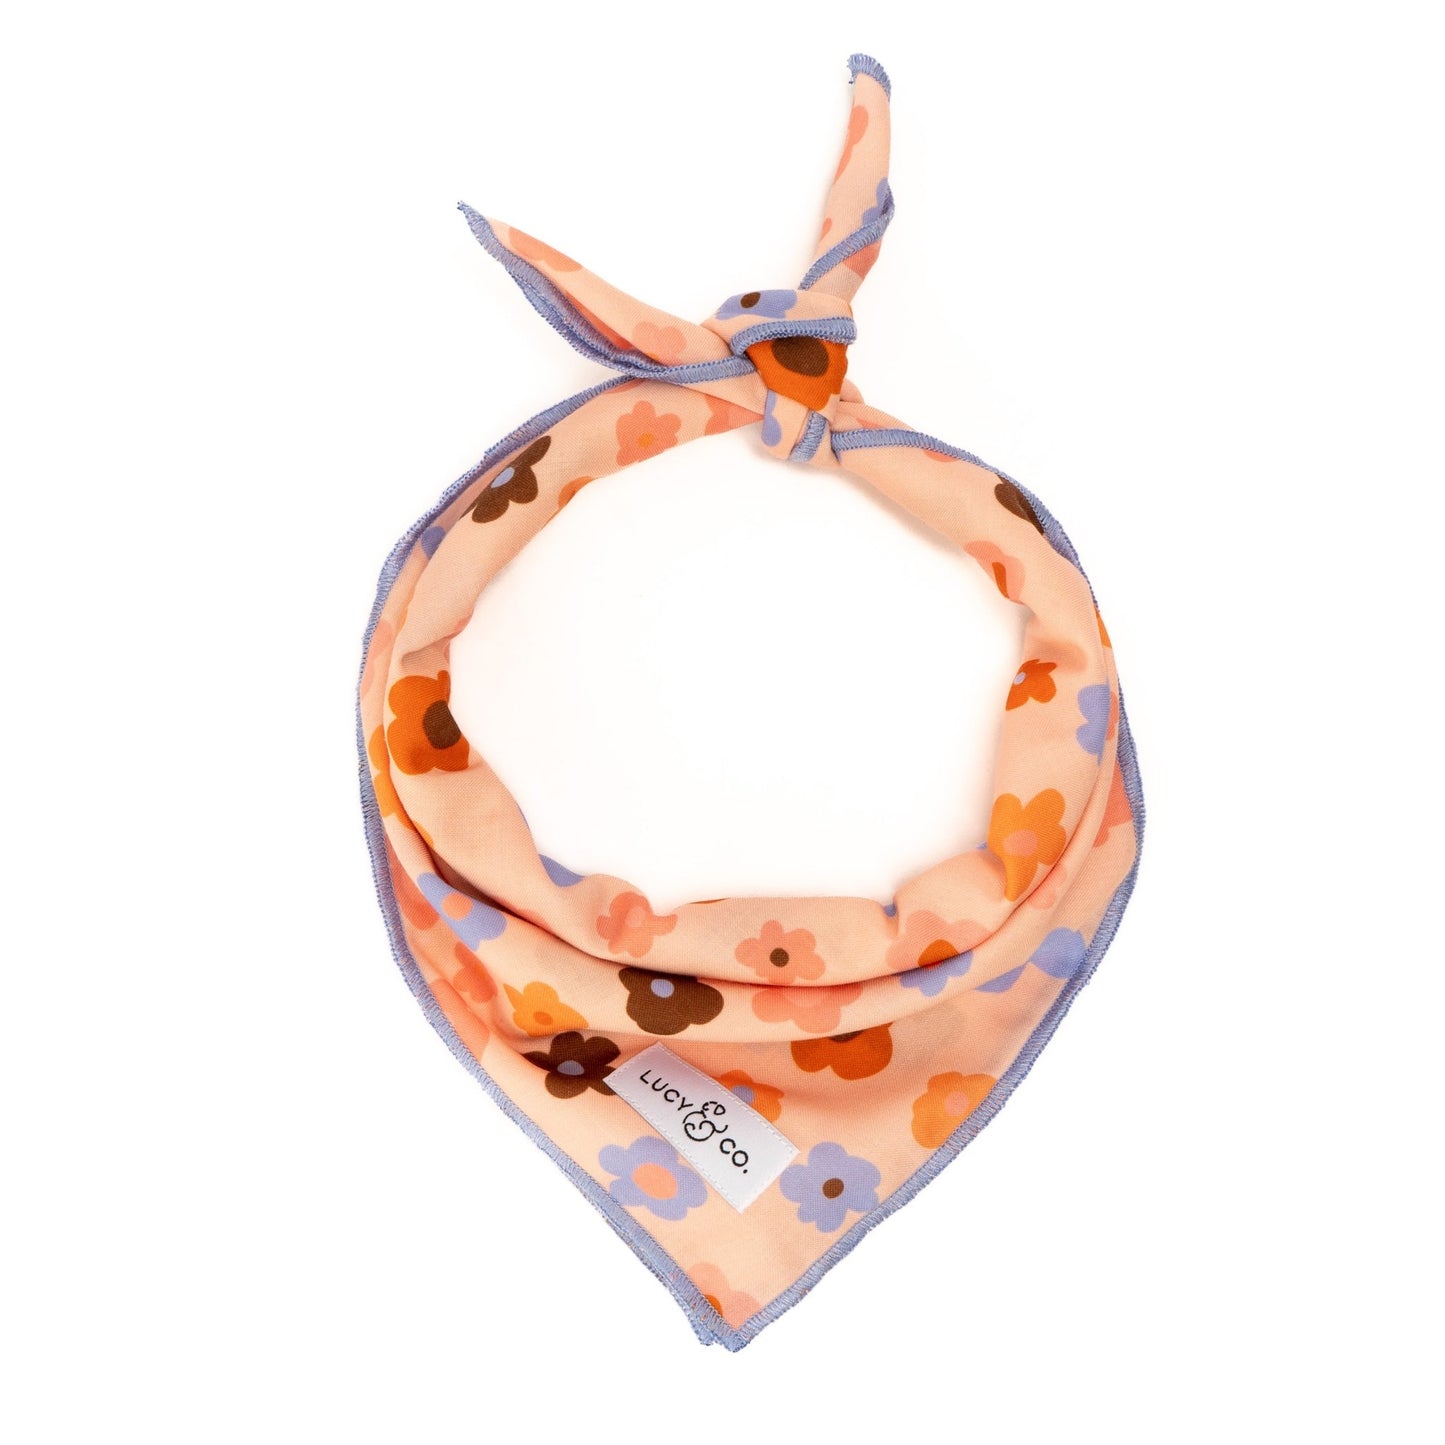 The Let's Groove Bandana